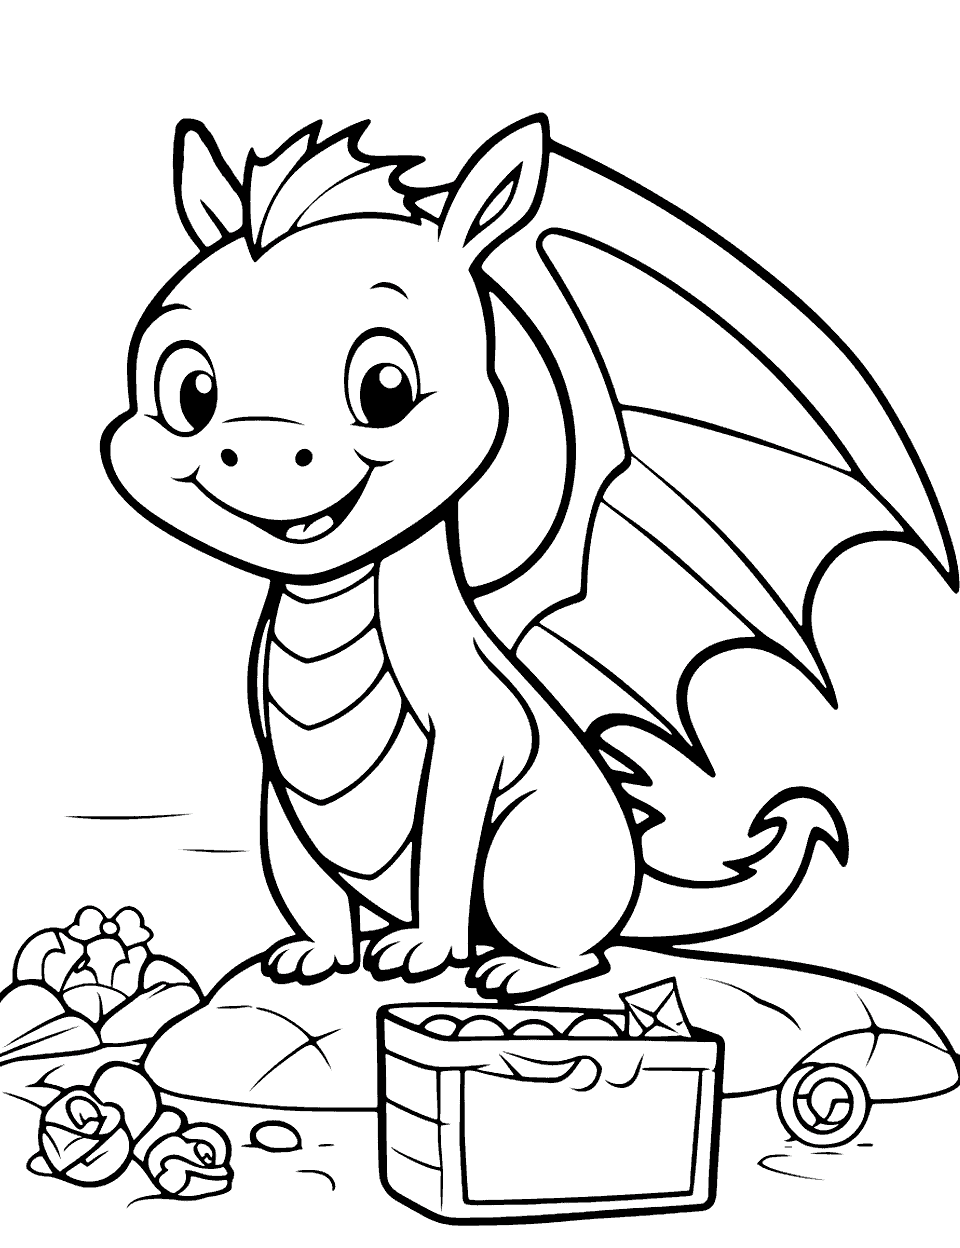 Fairy Tale Dragon Coloring Page - A baby dragon guarding a treasure chest in a cave.